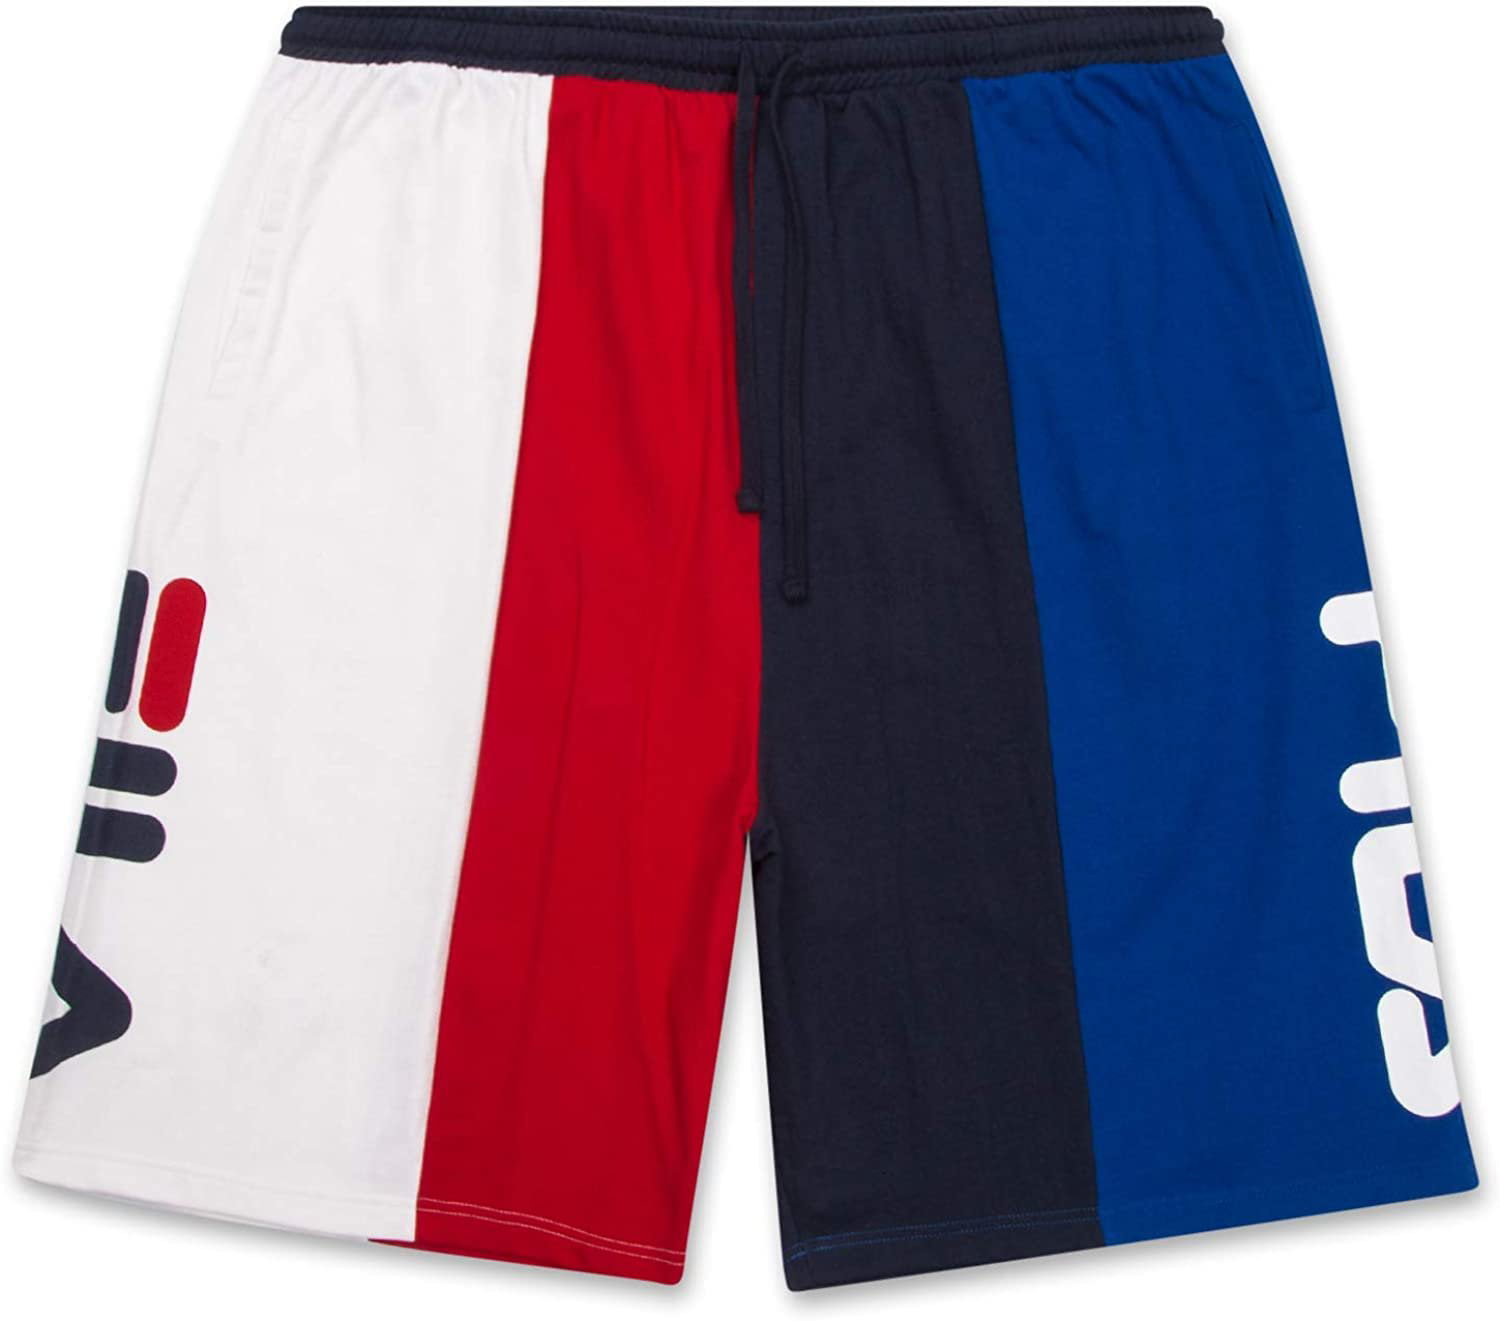 FILA - Fila Men's Big and Tall French Terry Lounge Shorts Cotton Gym ...